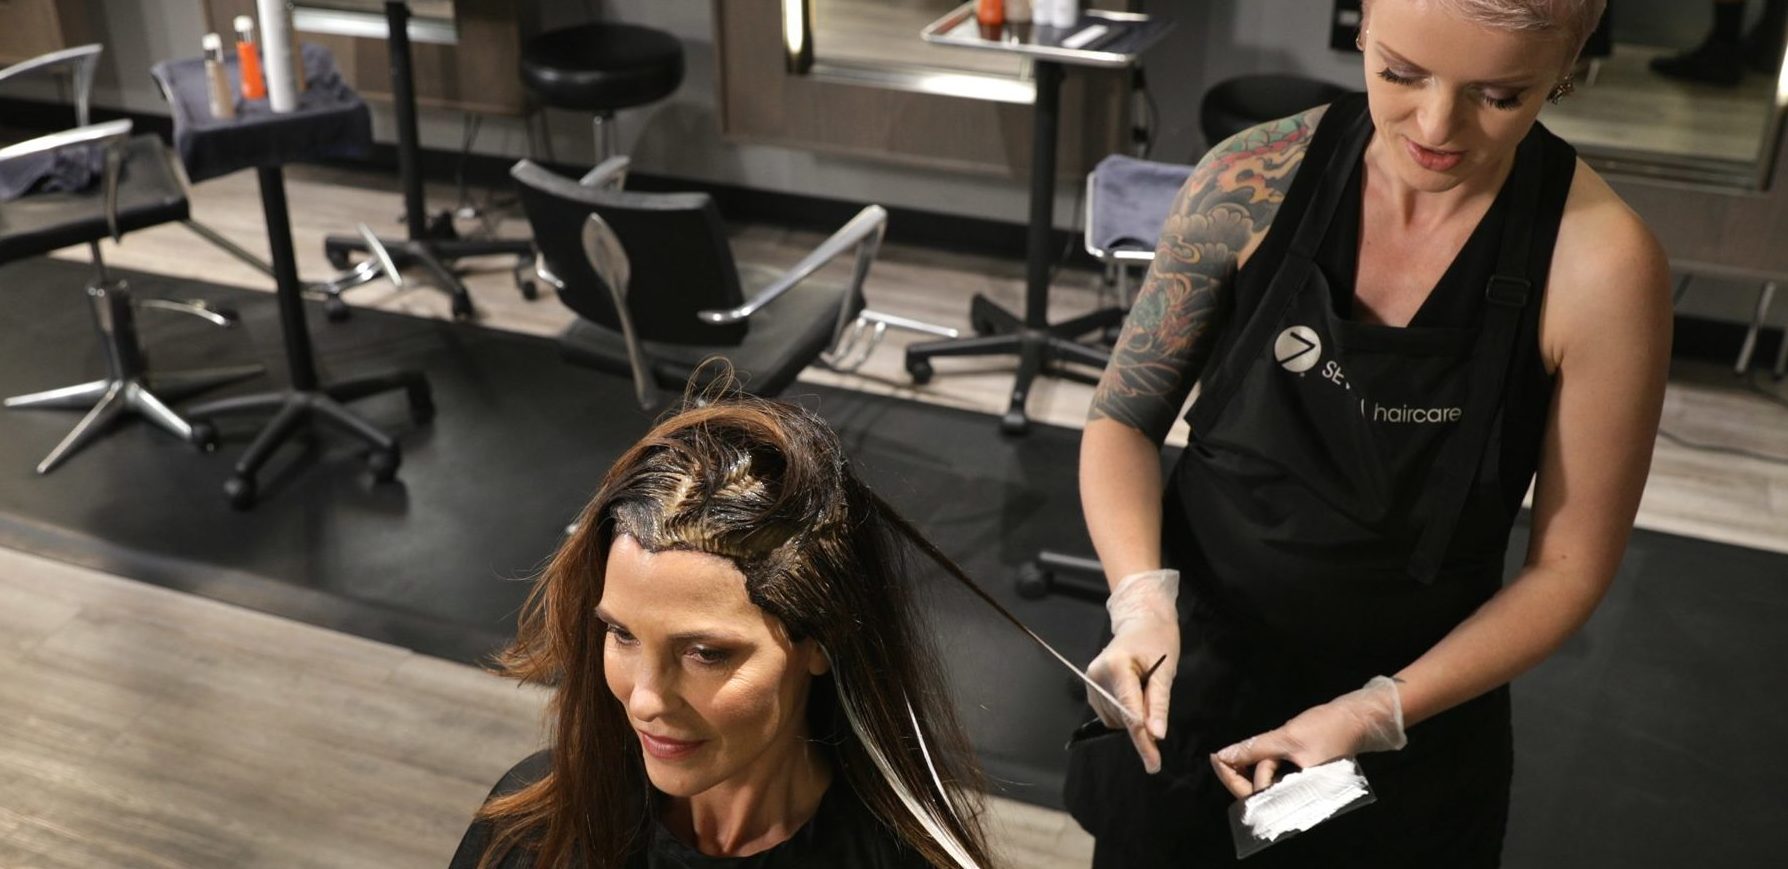 A hairstylist coloring a customer's grey hair in a salon.